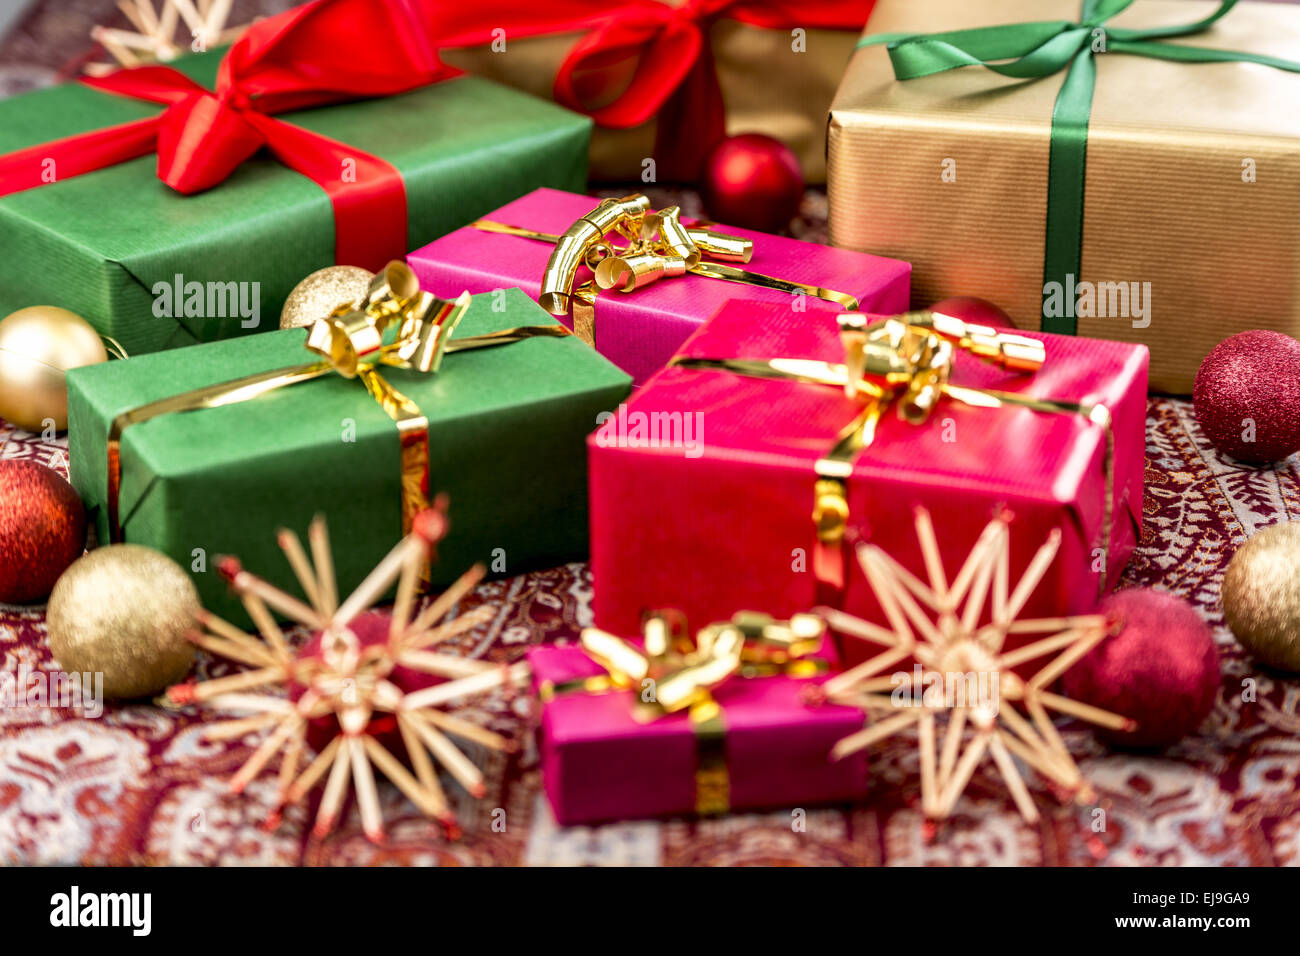 Xmas Presents with Bows, Baubles and Stars Stock Photo